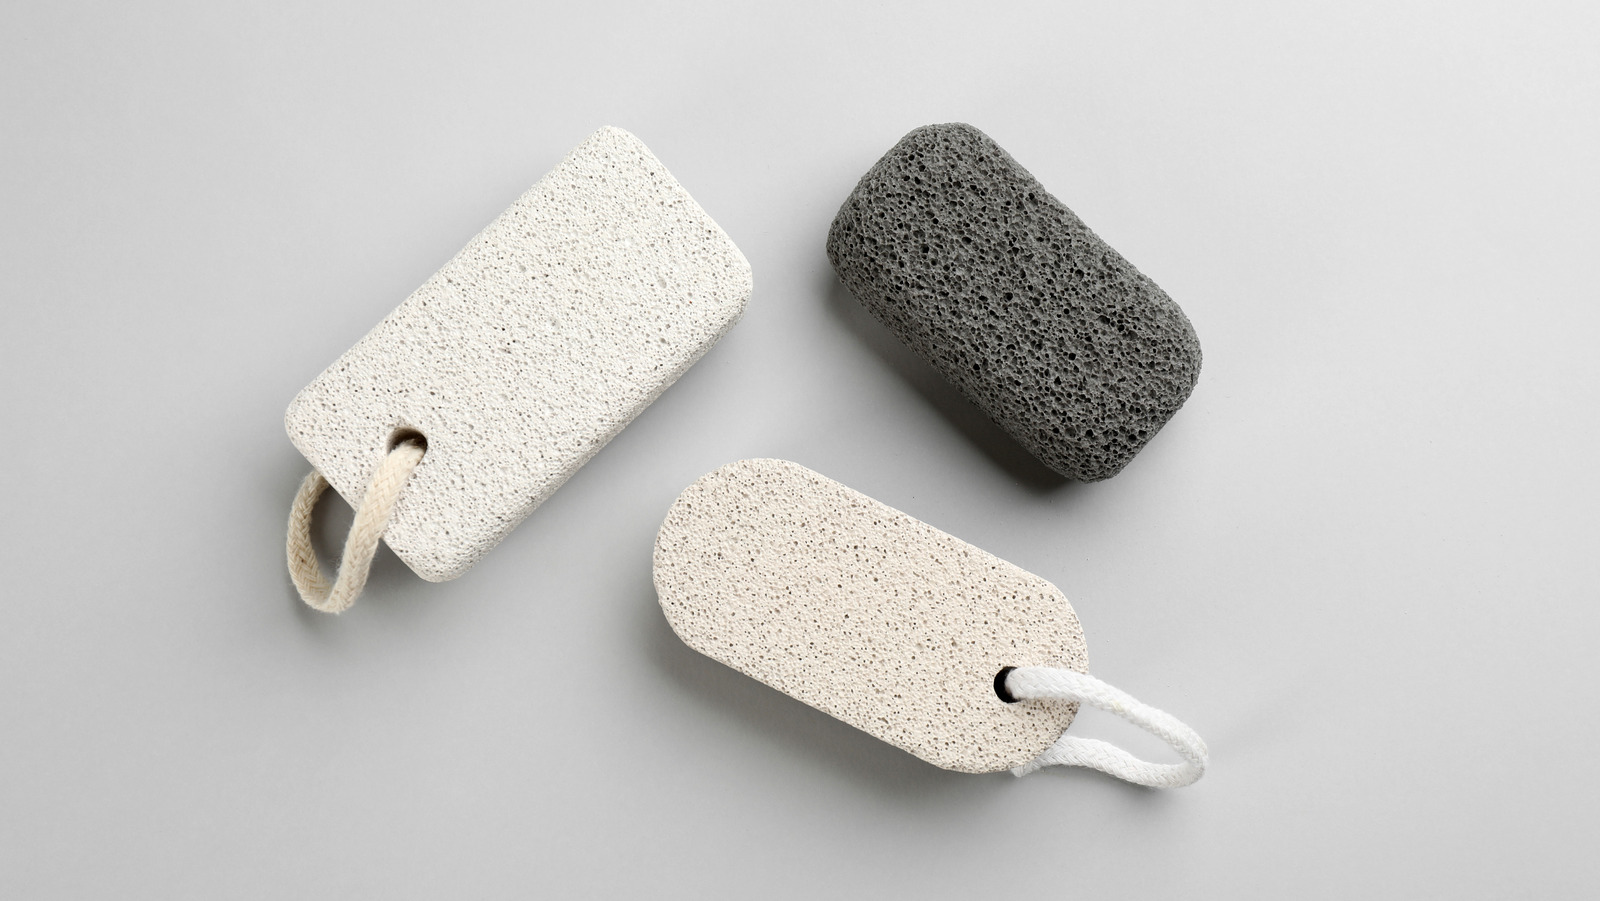 https://www.slashgear.com/img/gallery/why-you-might-want-to-reach-for-a-pumice-stone-when-cleaning-your-car/l-intro-1694190513.jpg